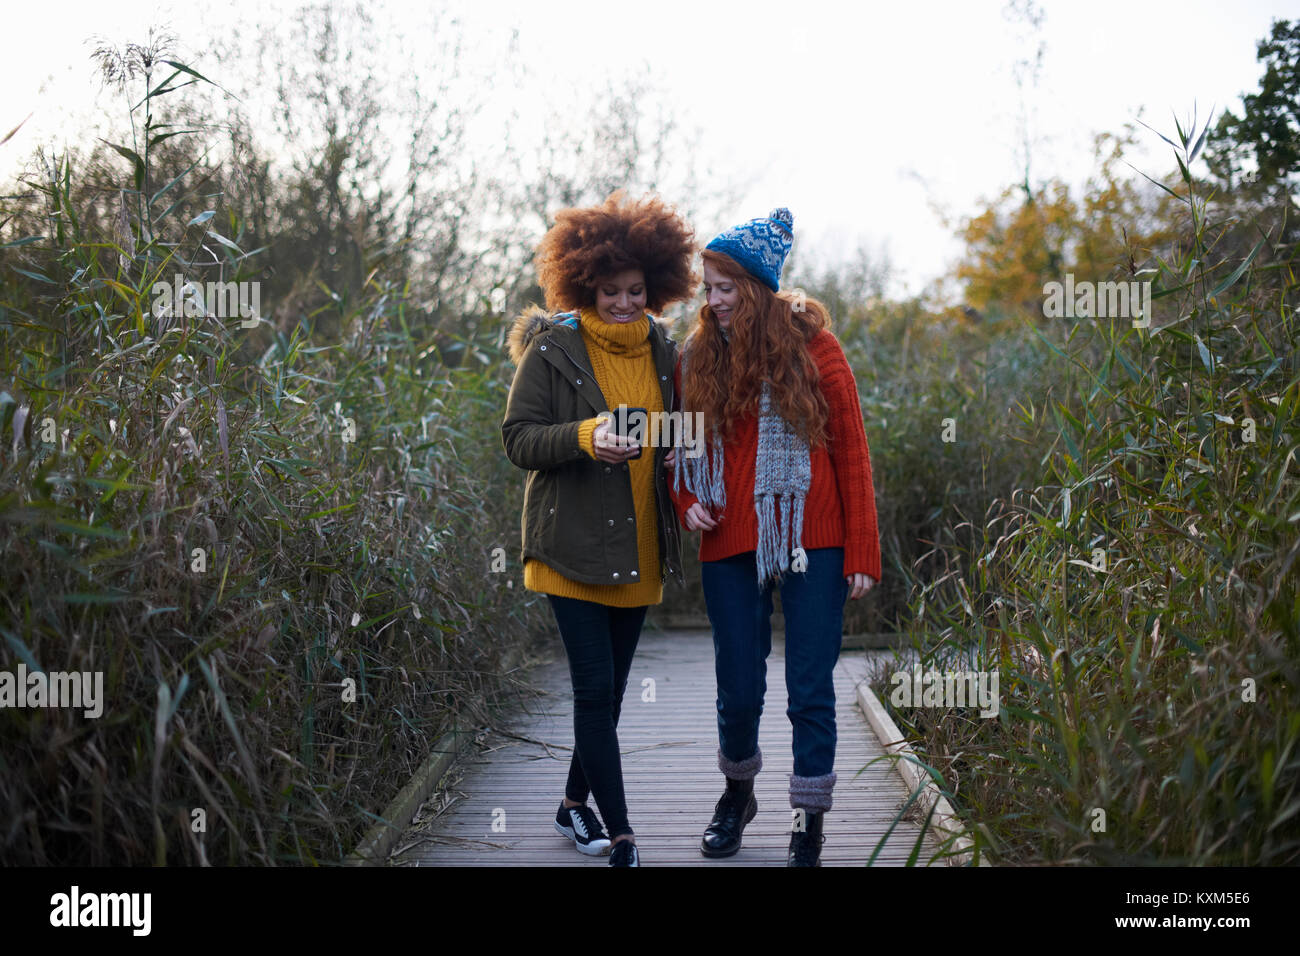 Friends on walkway in tall grass looking at smartphone Stock Photo